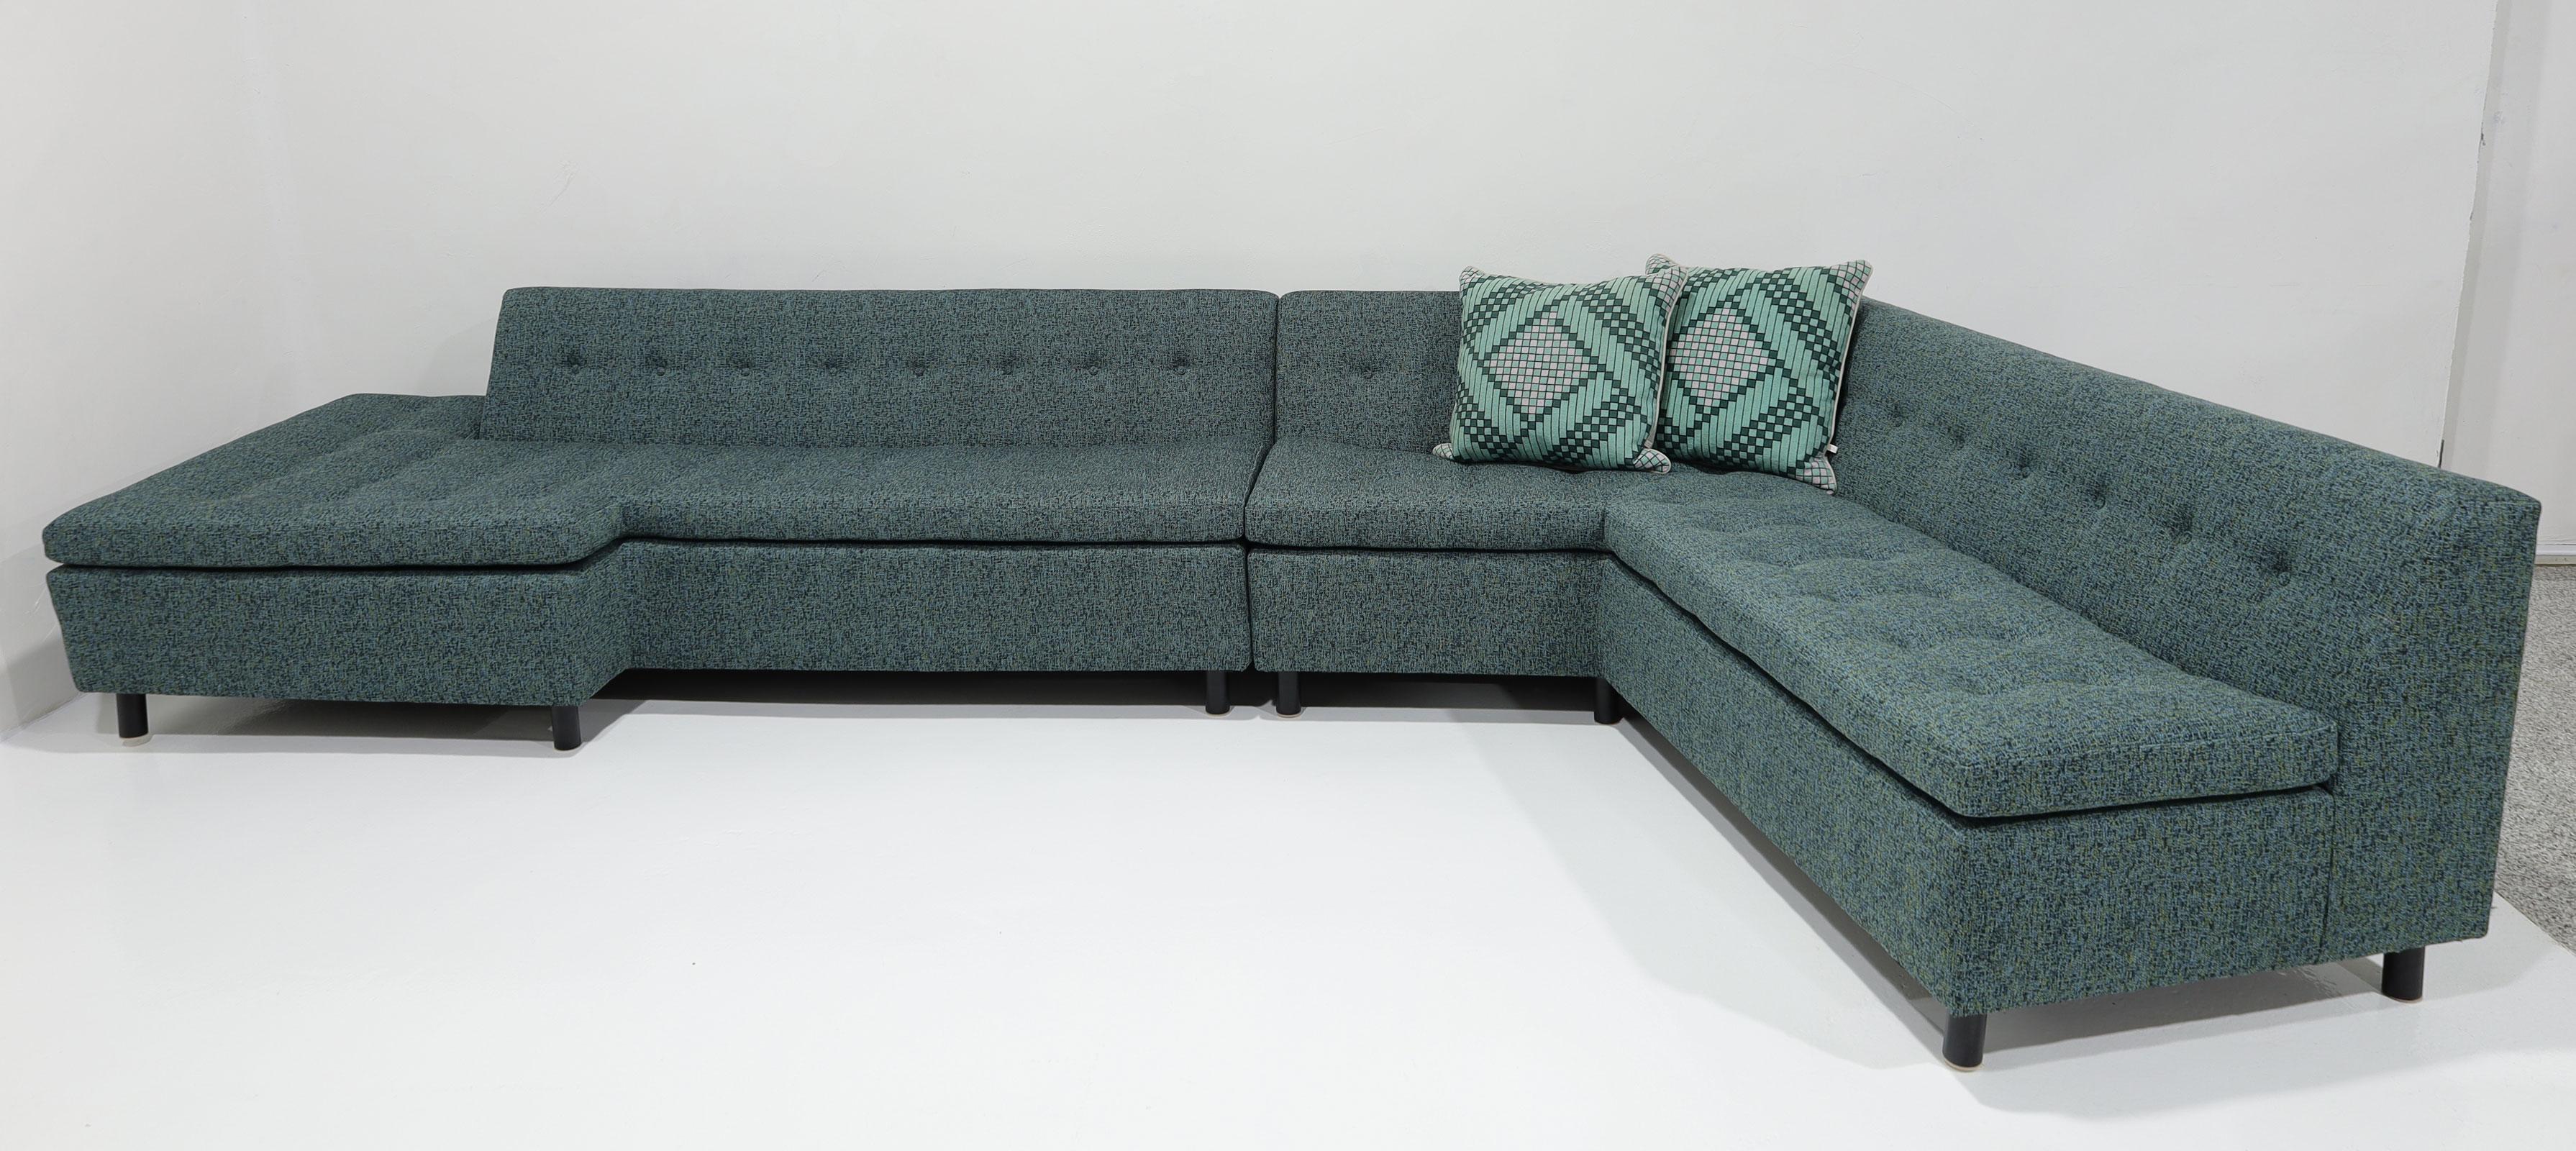 Harvey Probber Iconic Architectural Angle Sofa in Wool Upholstery For Sale 1